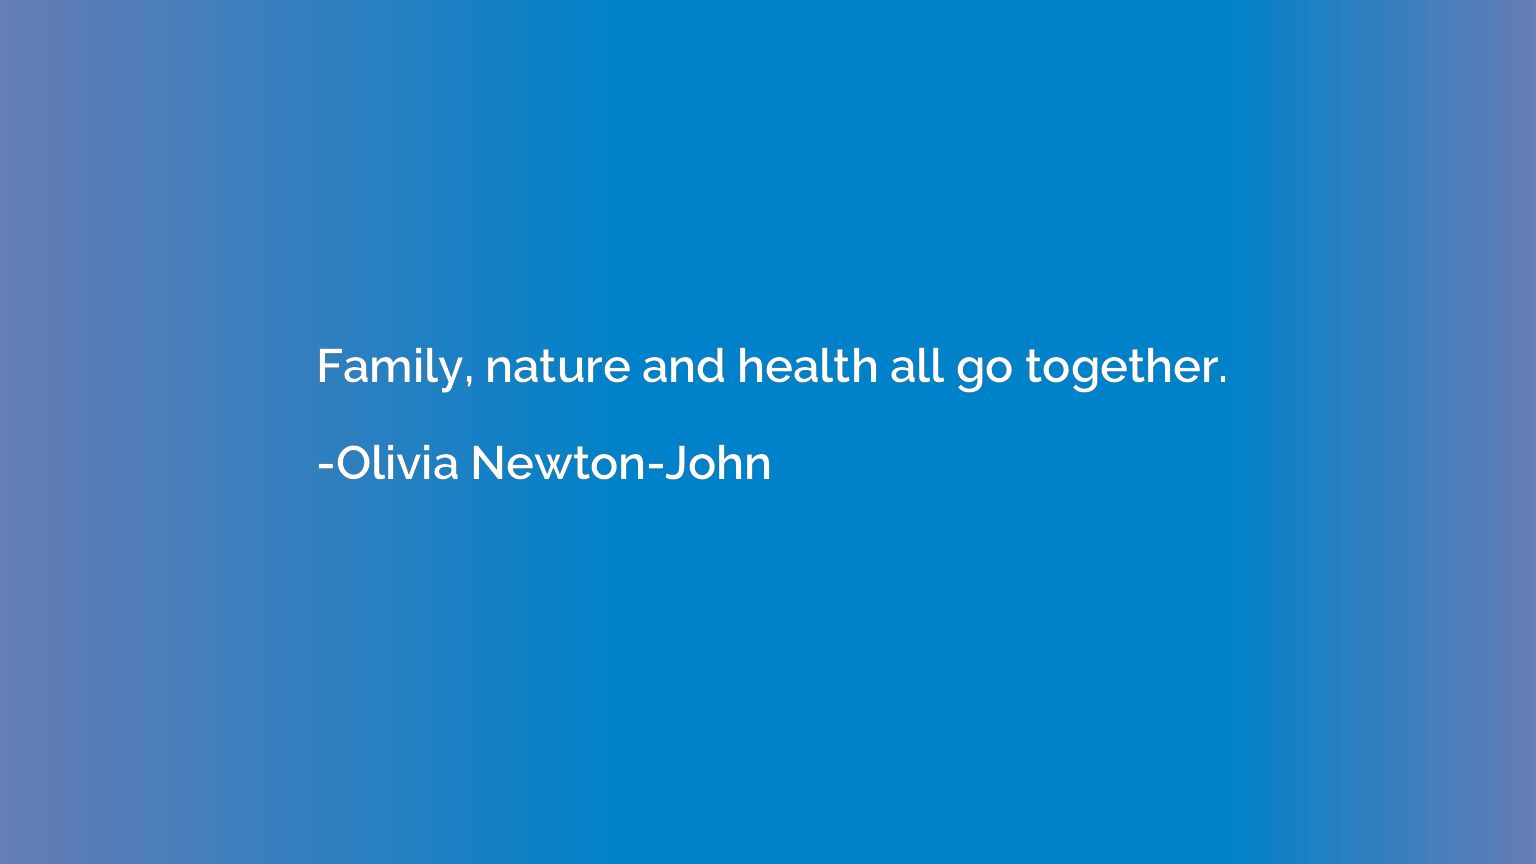 Family, nature and health all go together.